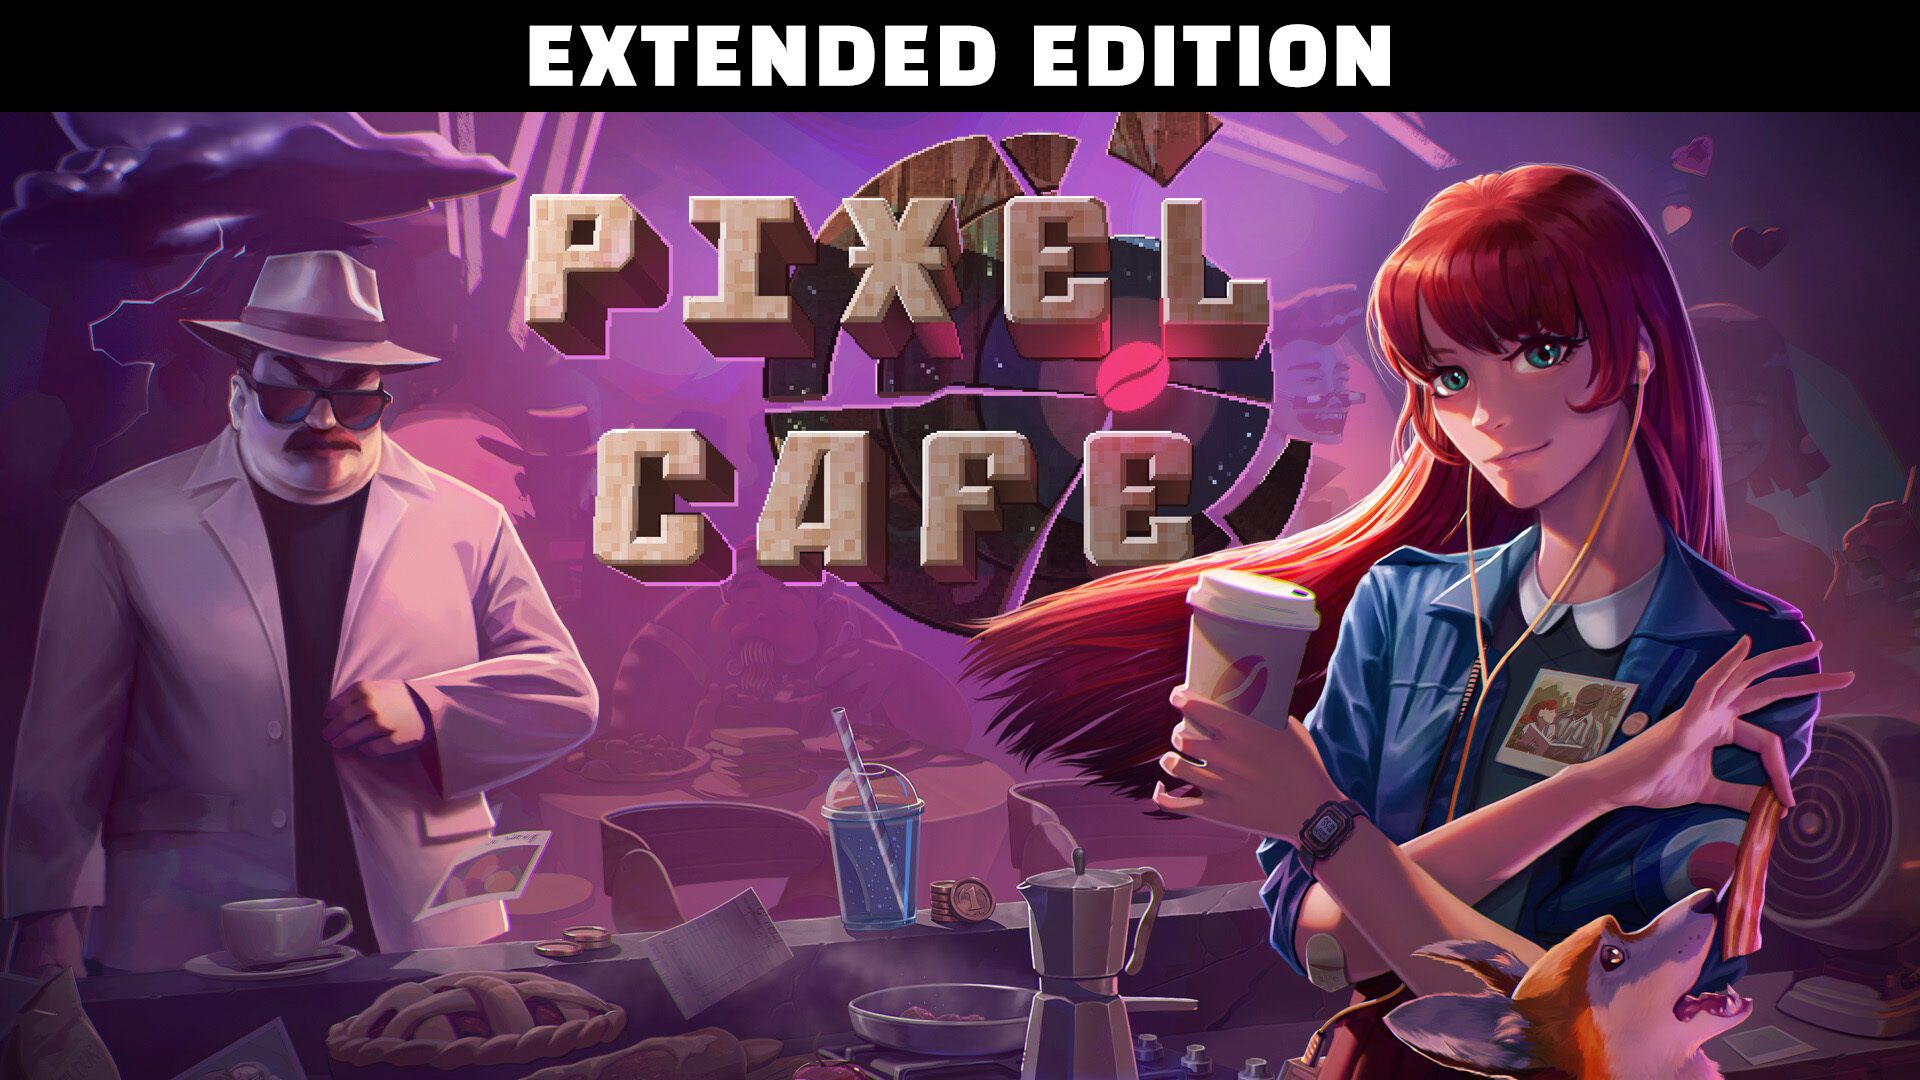 Pixel Cafe Extended Edition ダウンロード版 | My Nintendo Store 